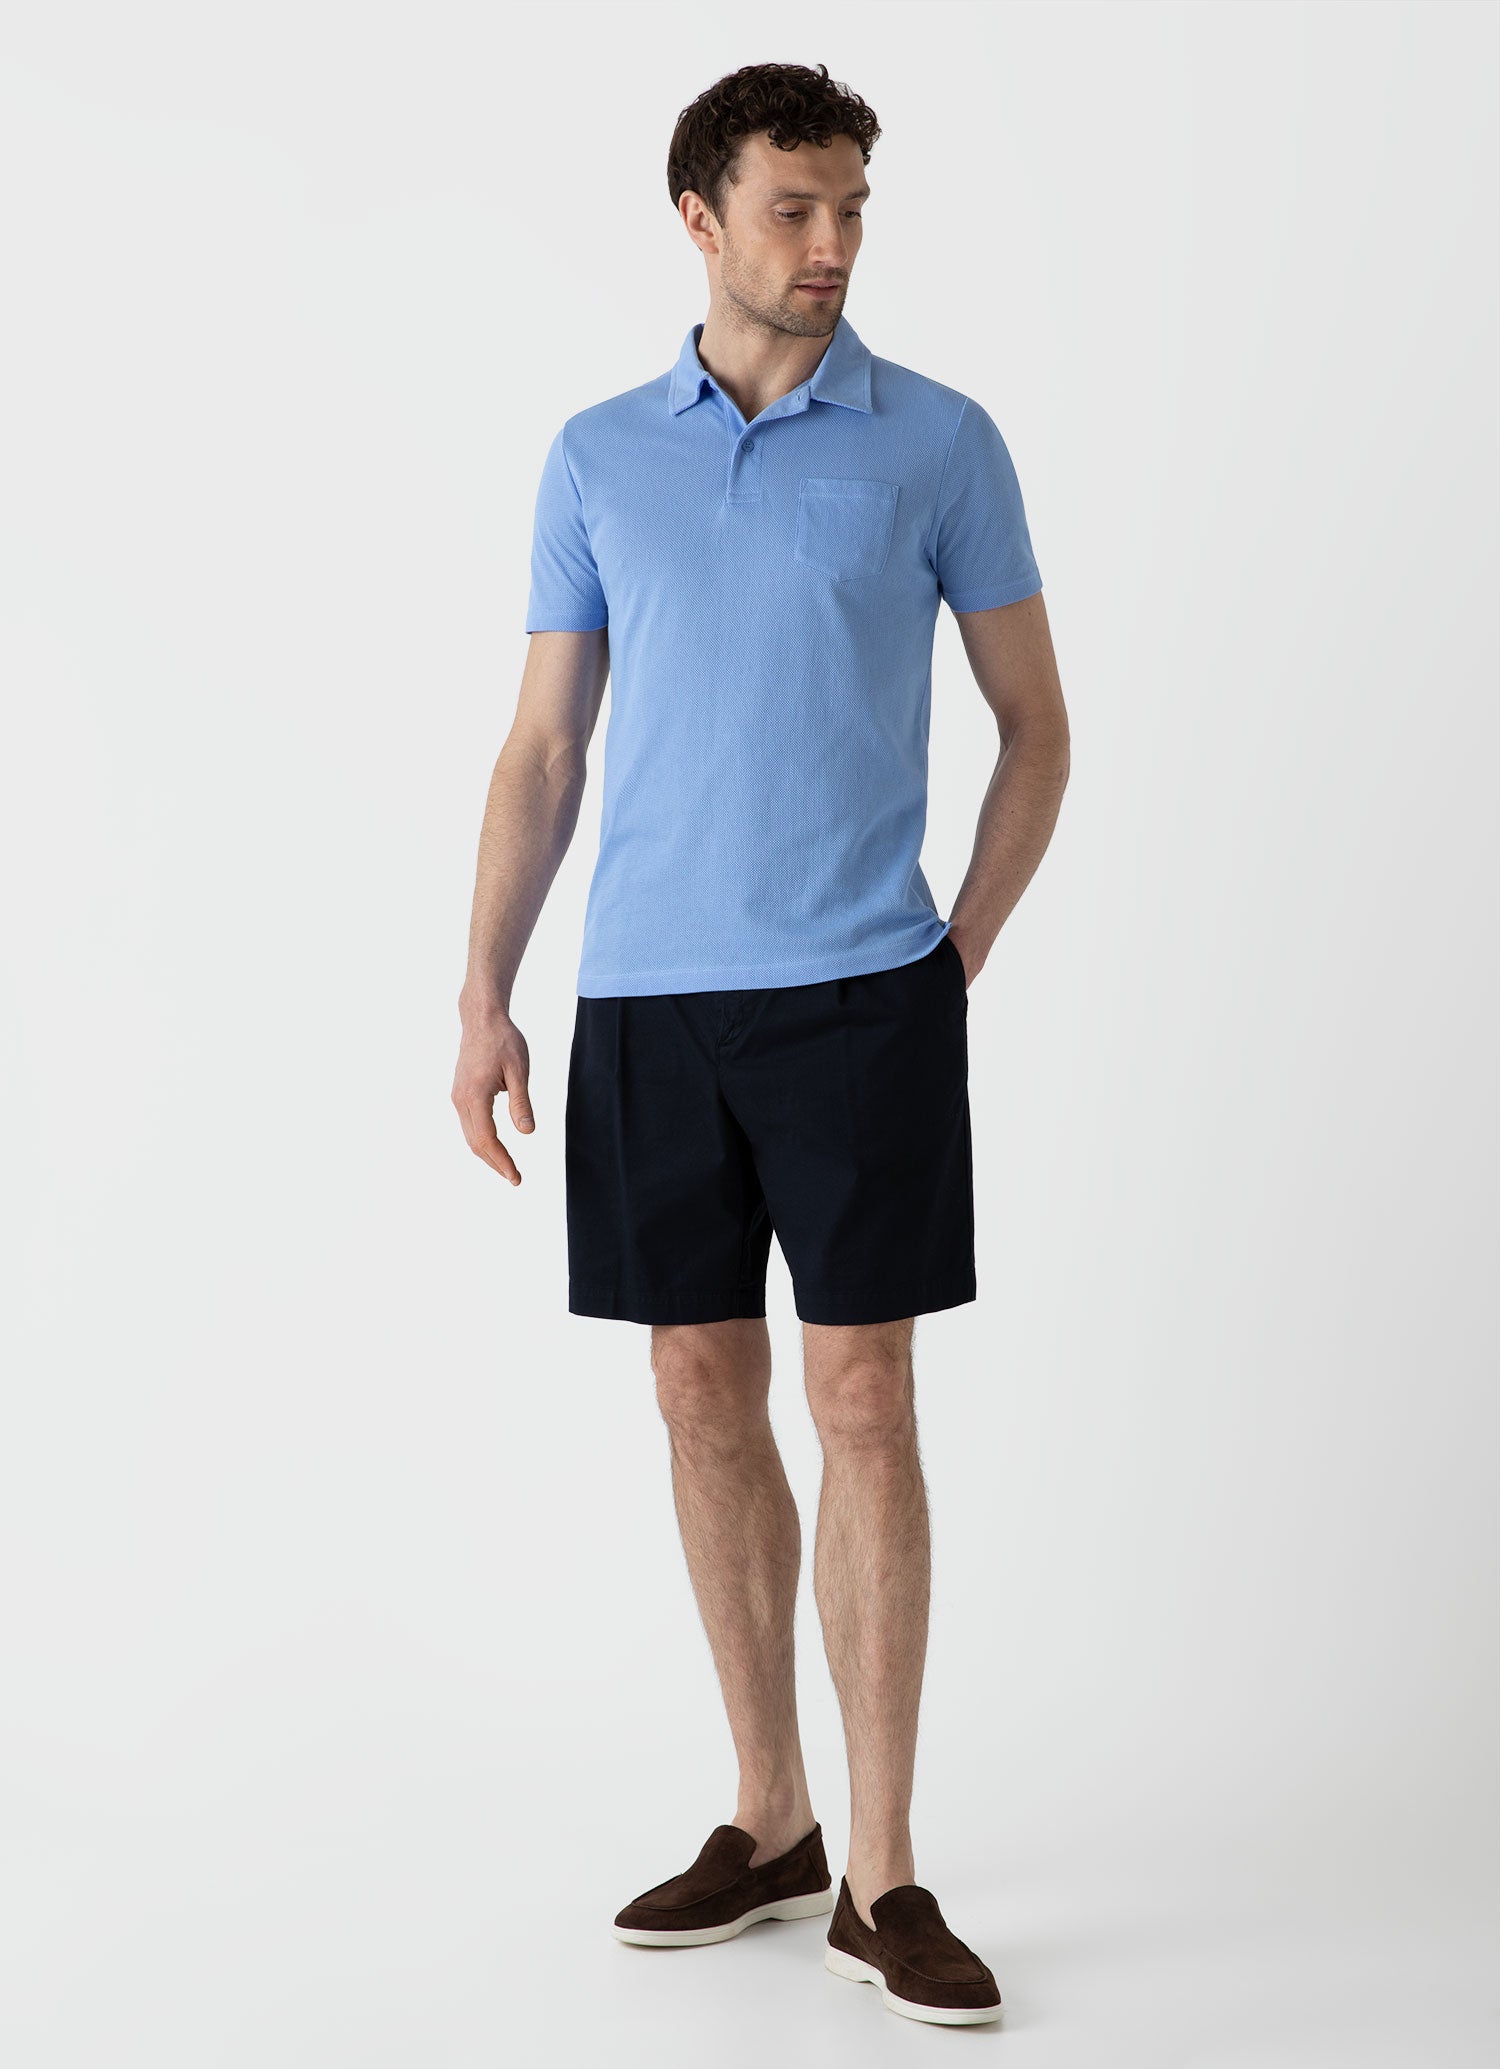 Men's Riviera Polo Shirt in Cool Blue